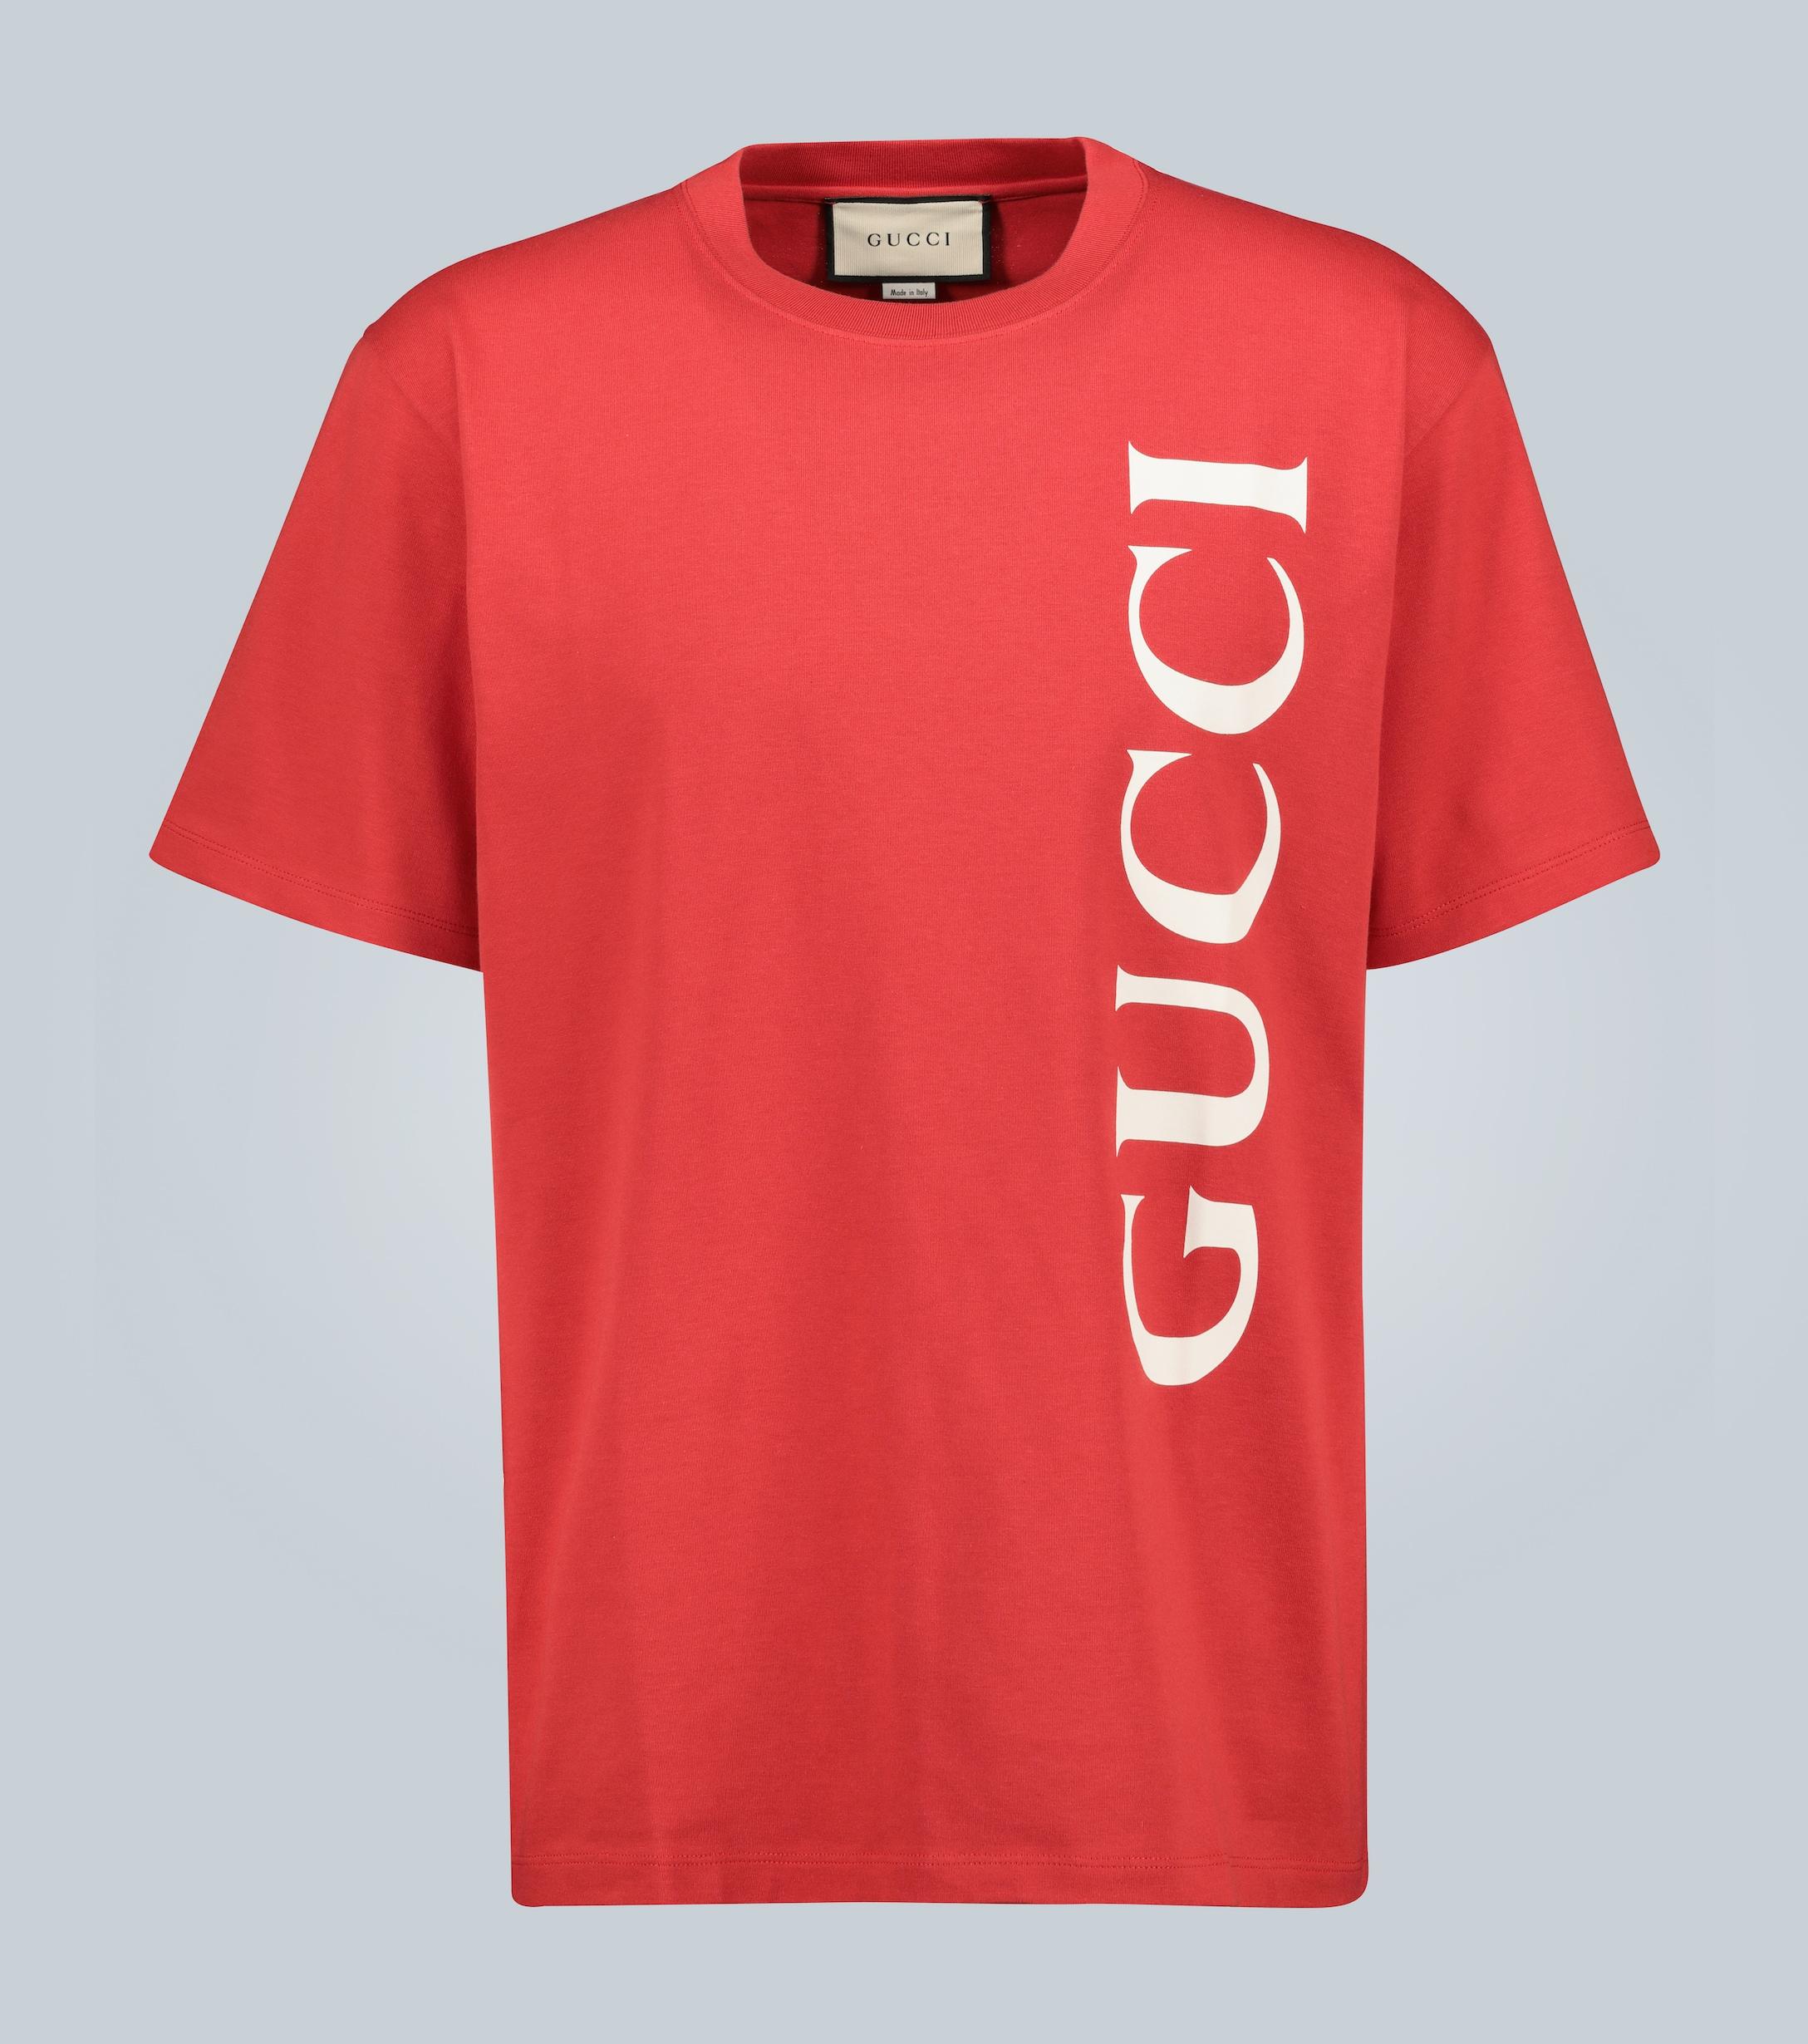 Gucci Cotton Print Oversized T-shirt in Red for Men - Lyst